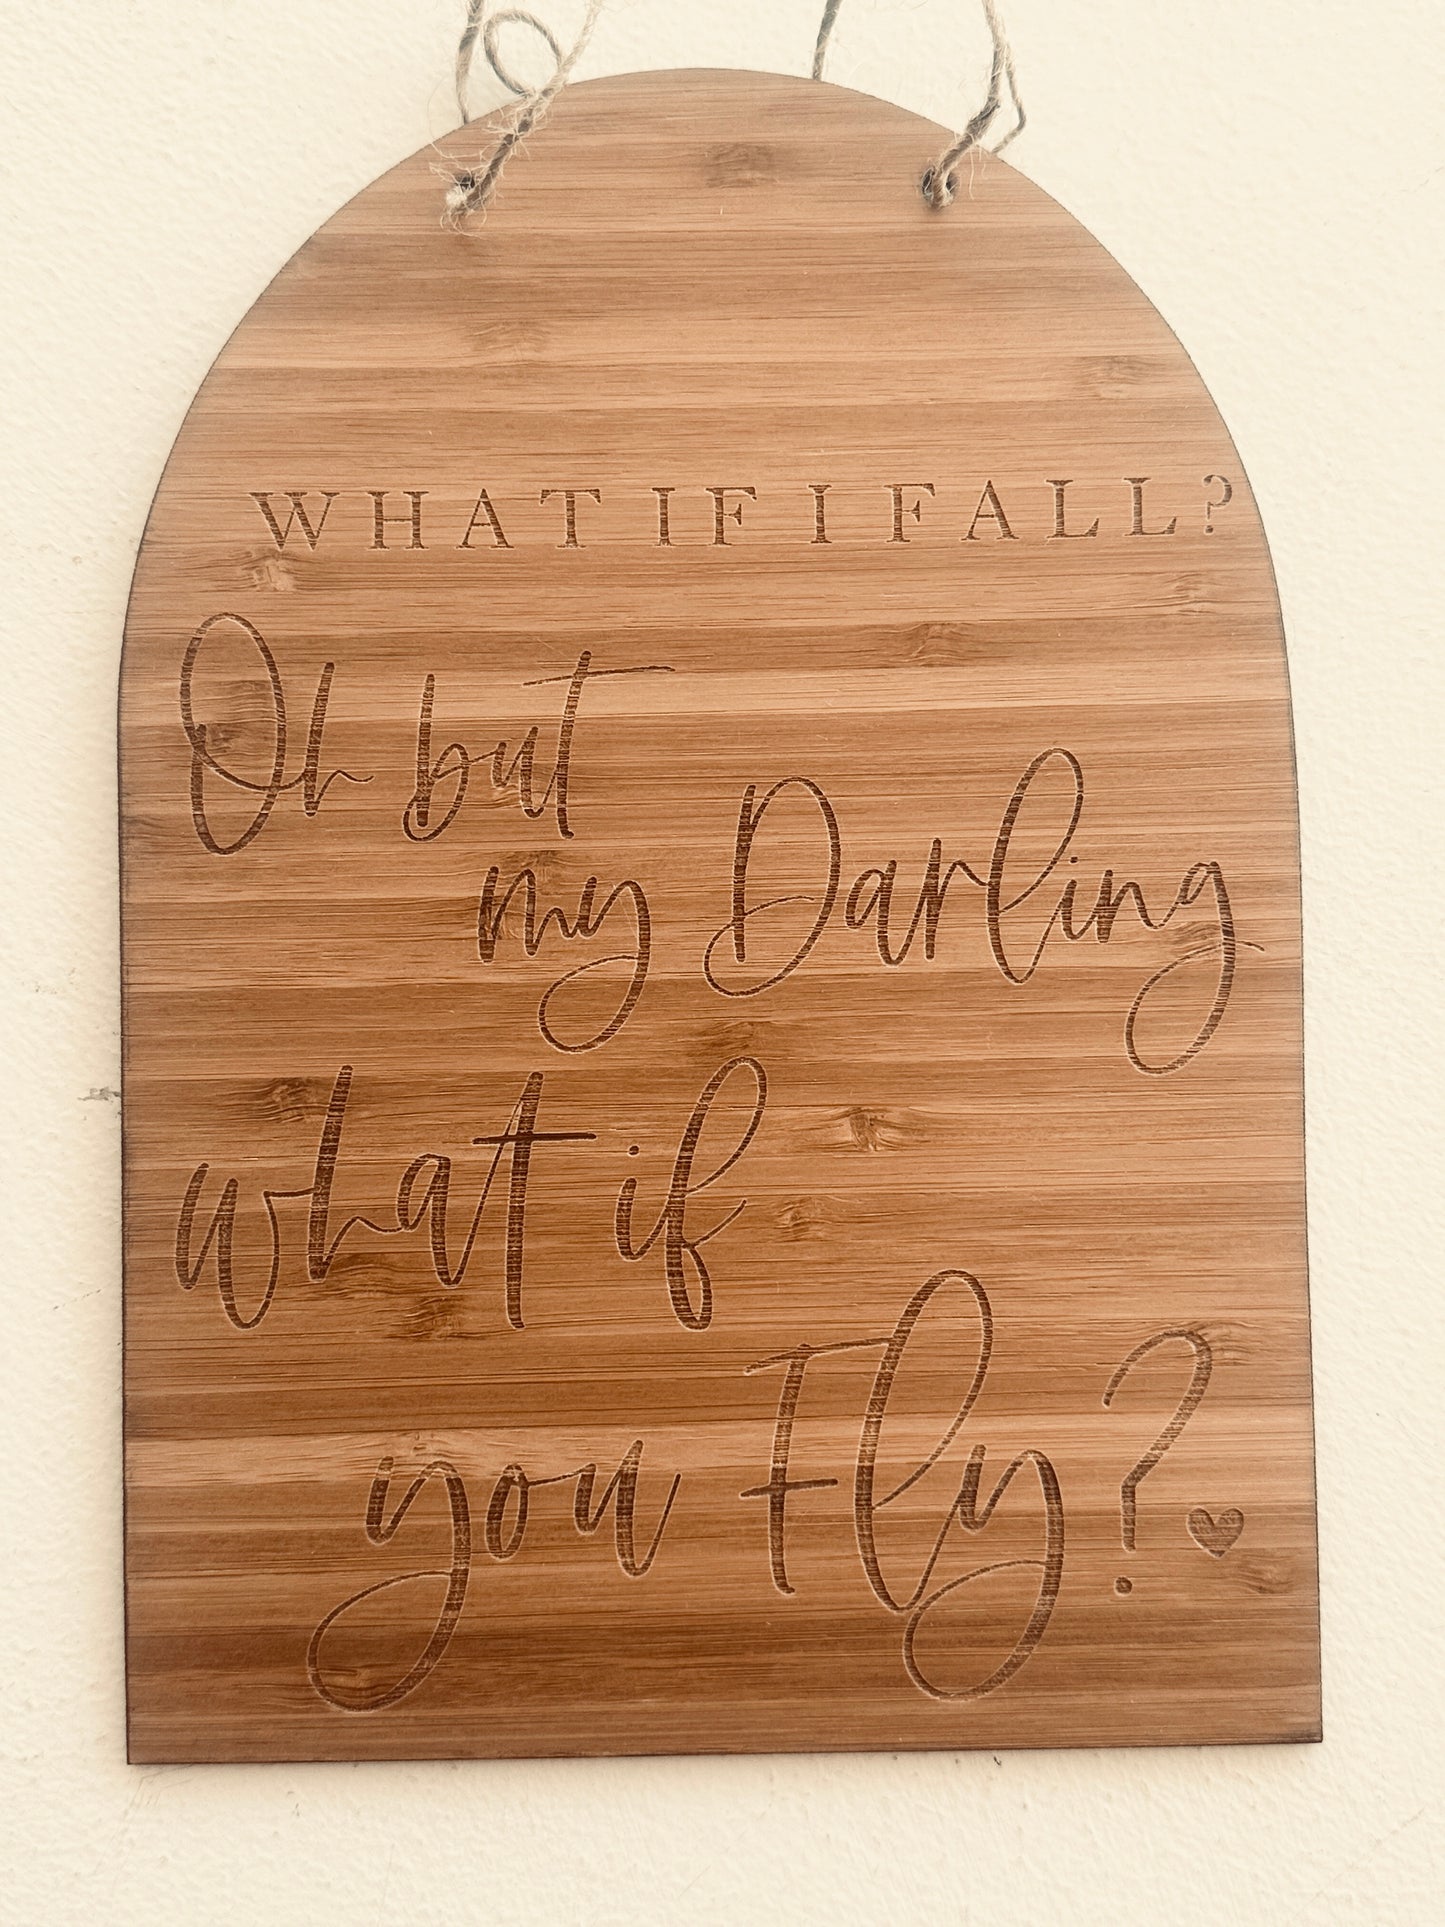 What if I fall plaque